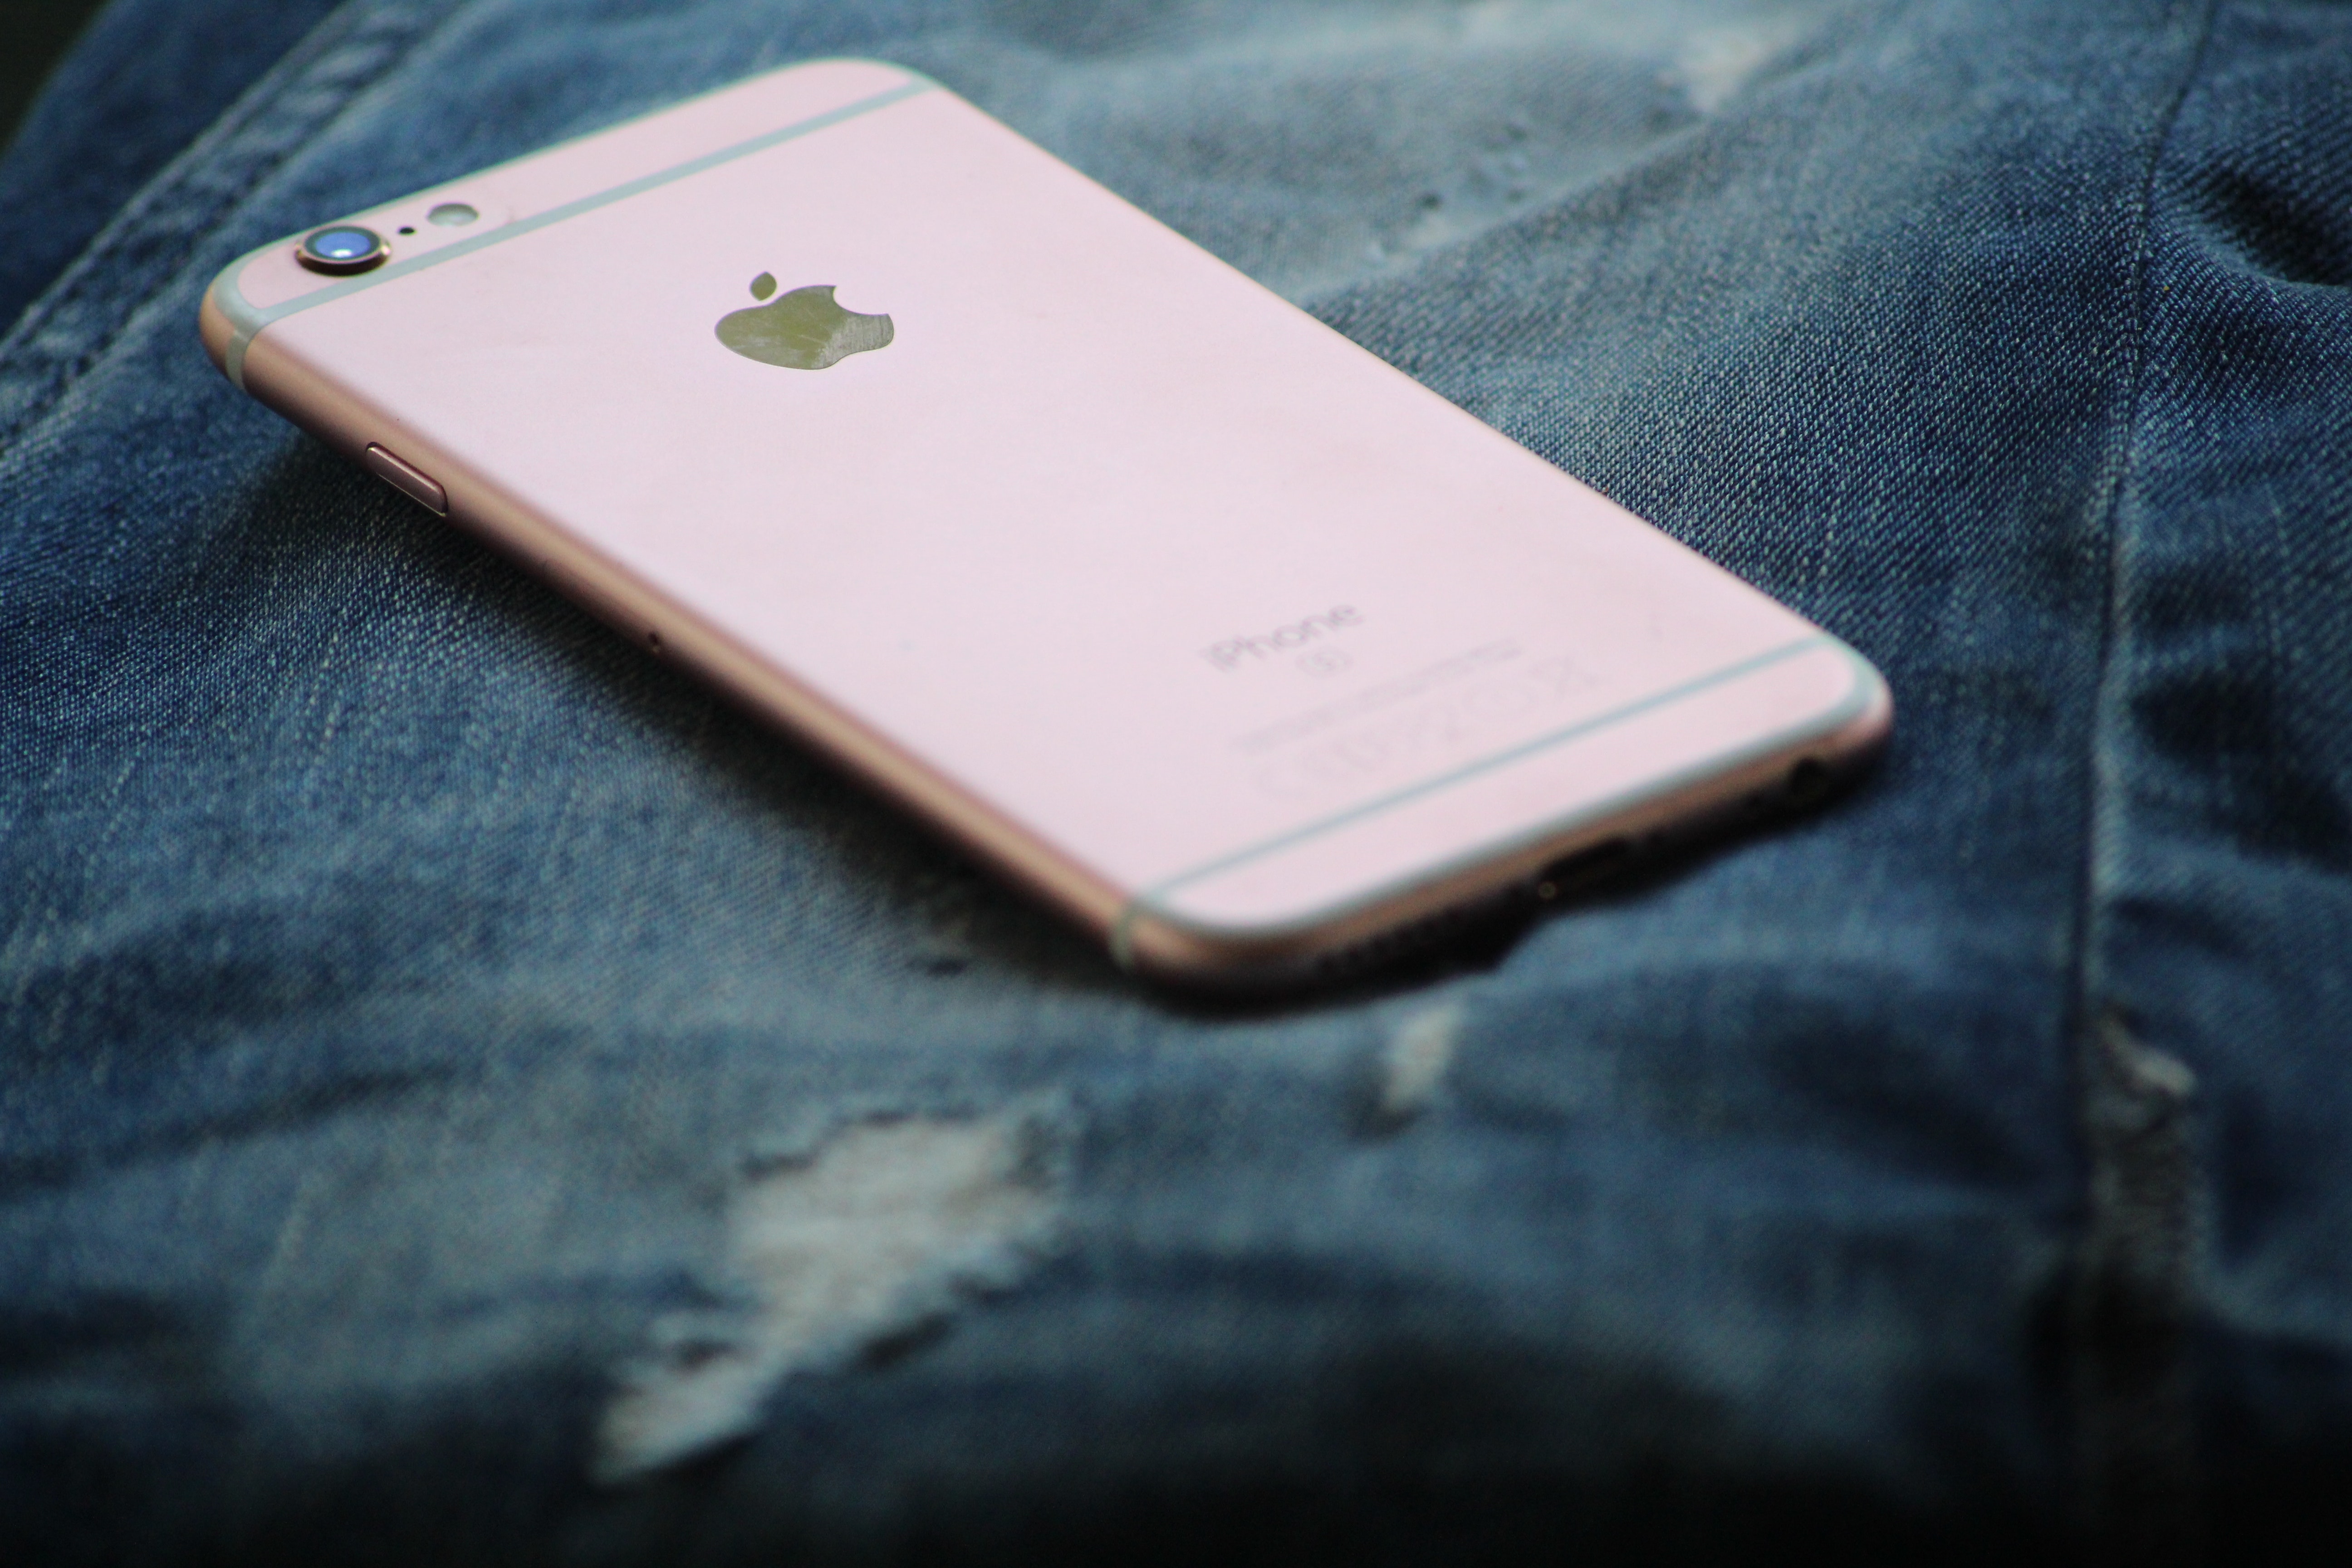 Close-Up Photography of Rose Gold Iphone 6s on Top of Blue Denim Jeans, Apple device, Blur, Cellphone, Close-up, HQ Photo